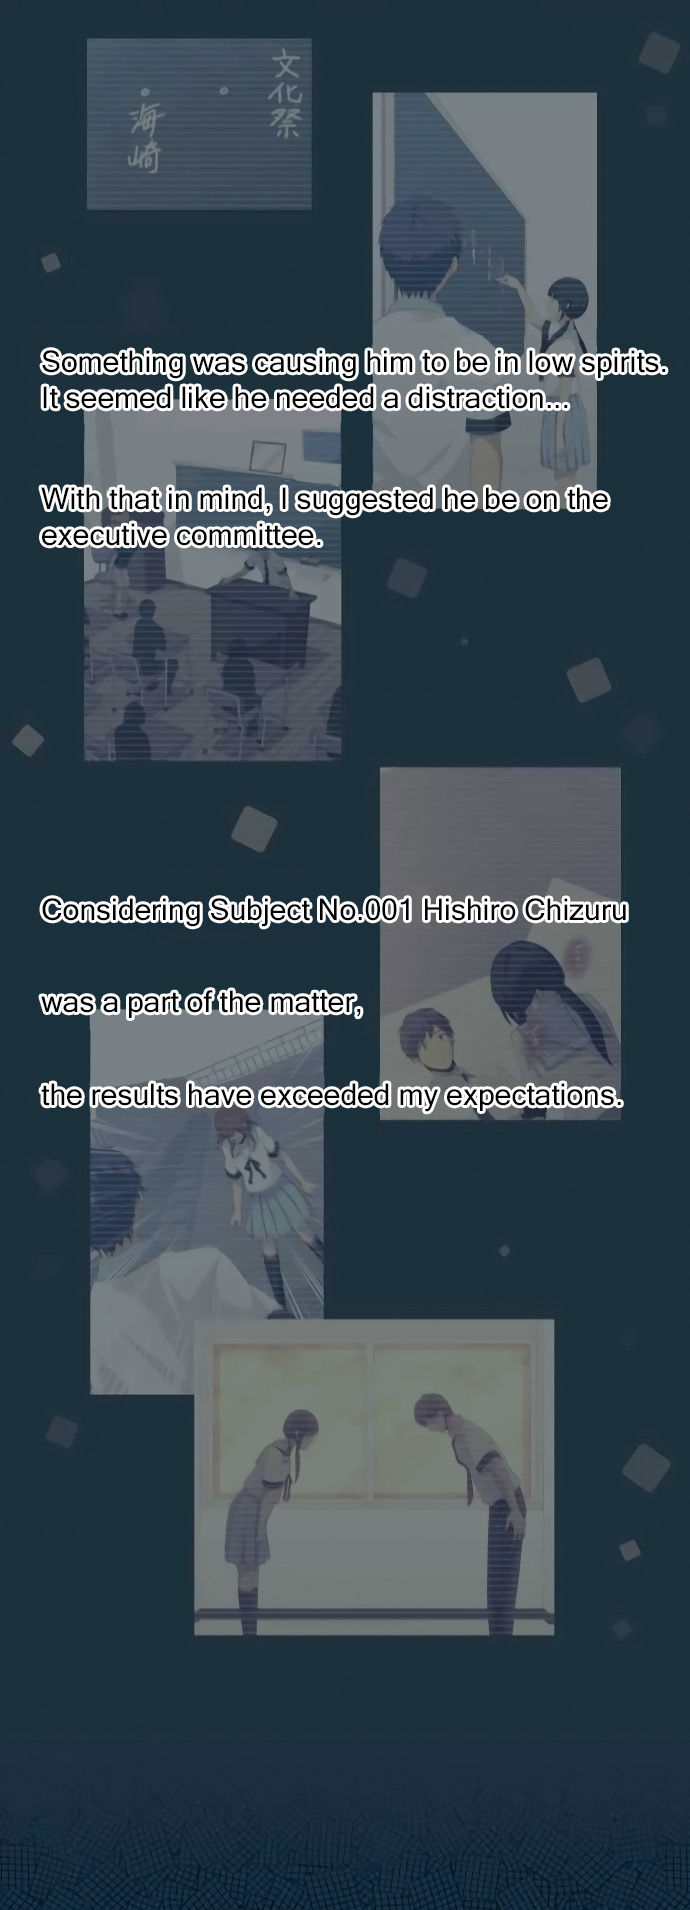 ReLIFE Ch.154